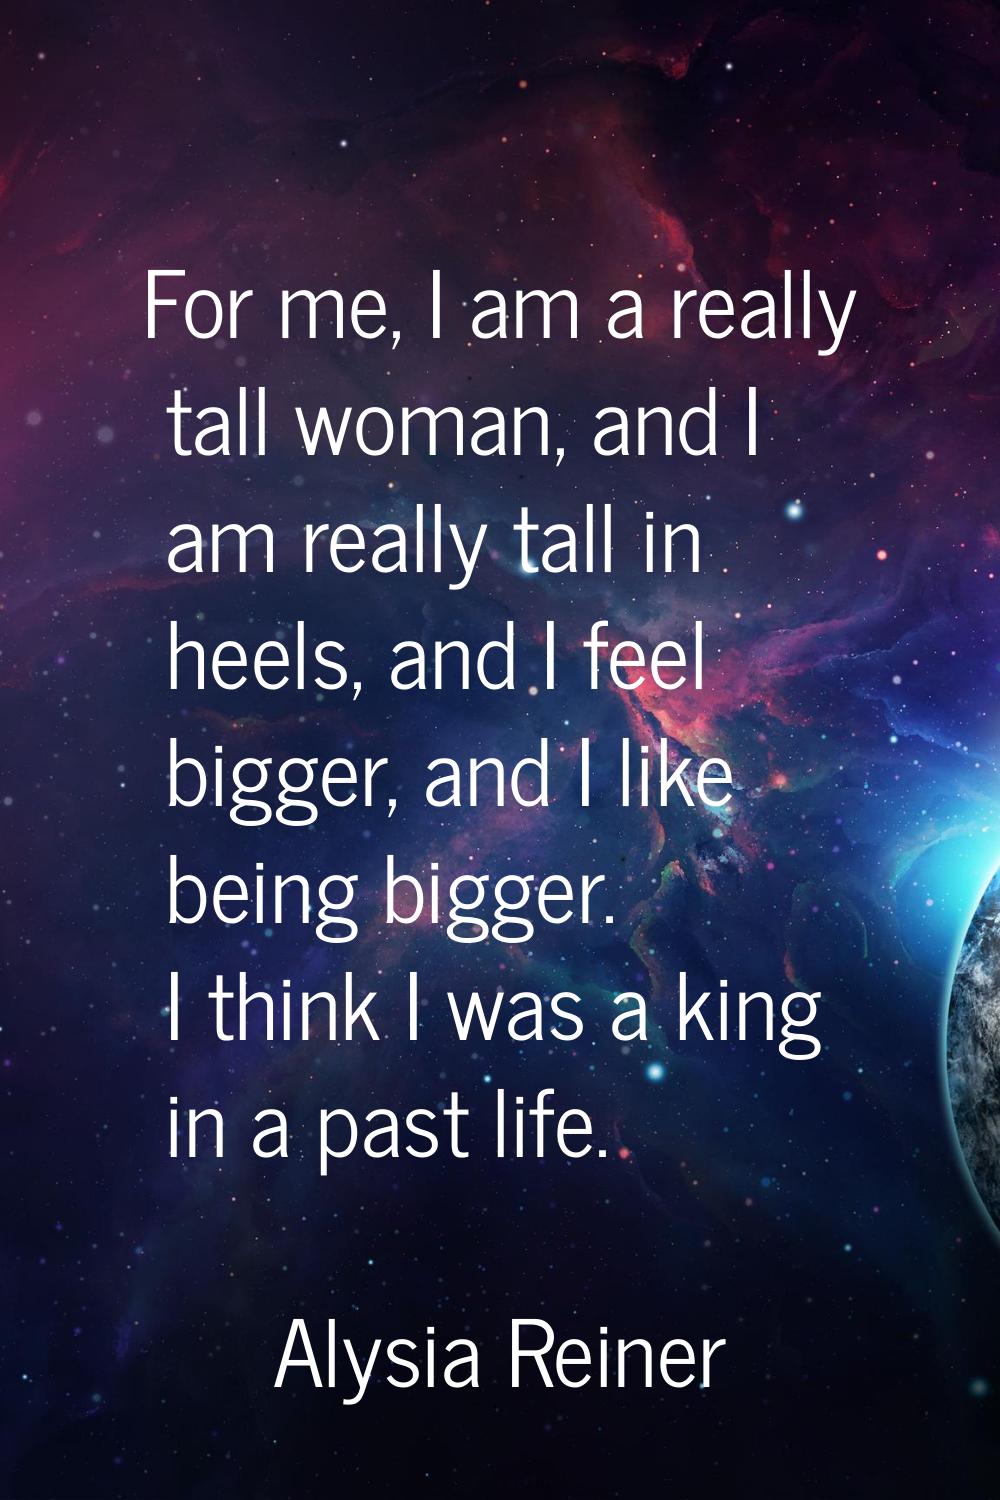 For me, I am a really tall woman, and I am really tall in heels, and I feel bigger, and I like bein